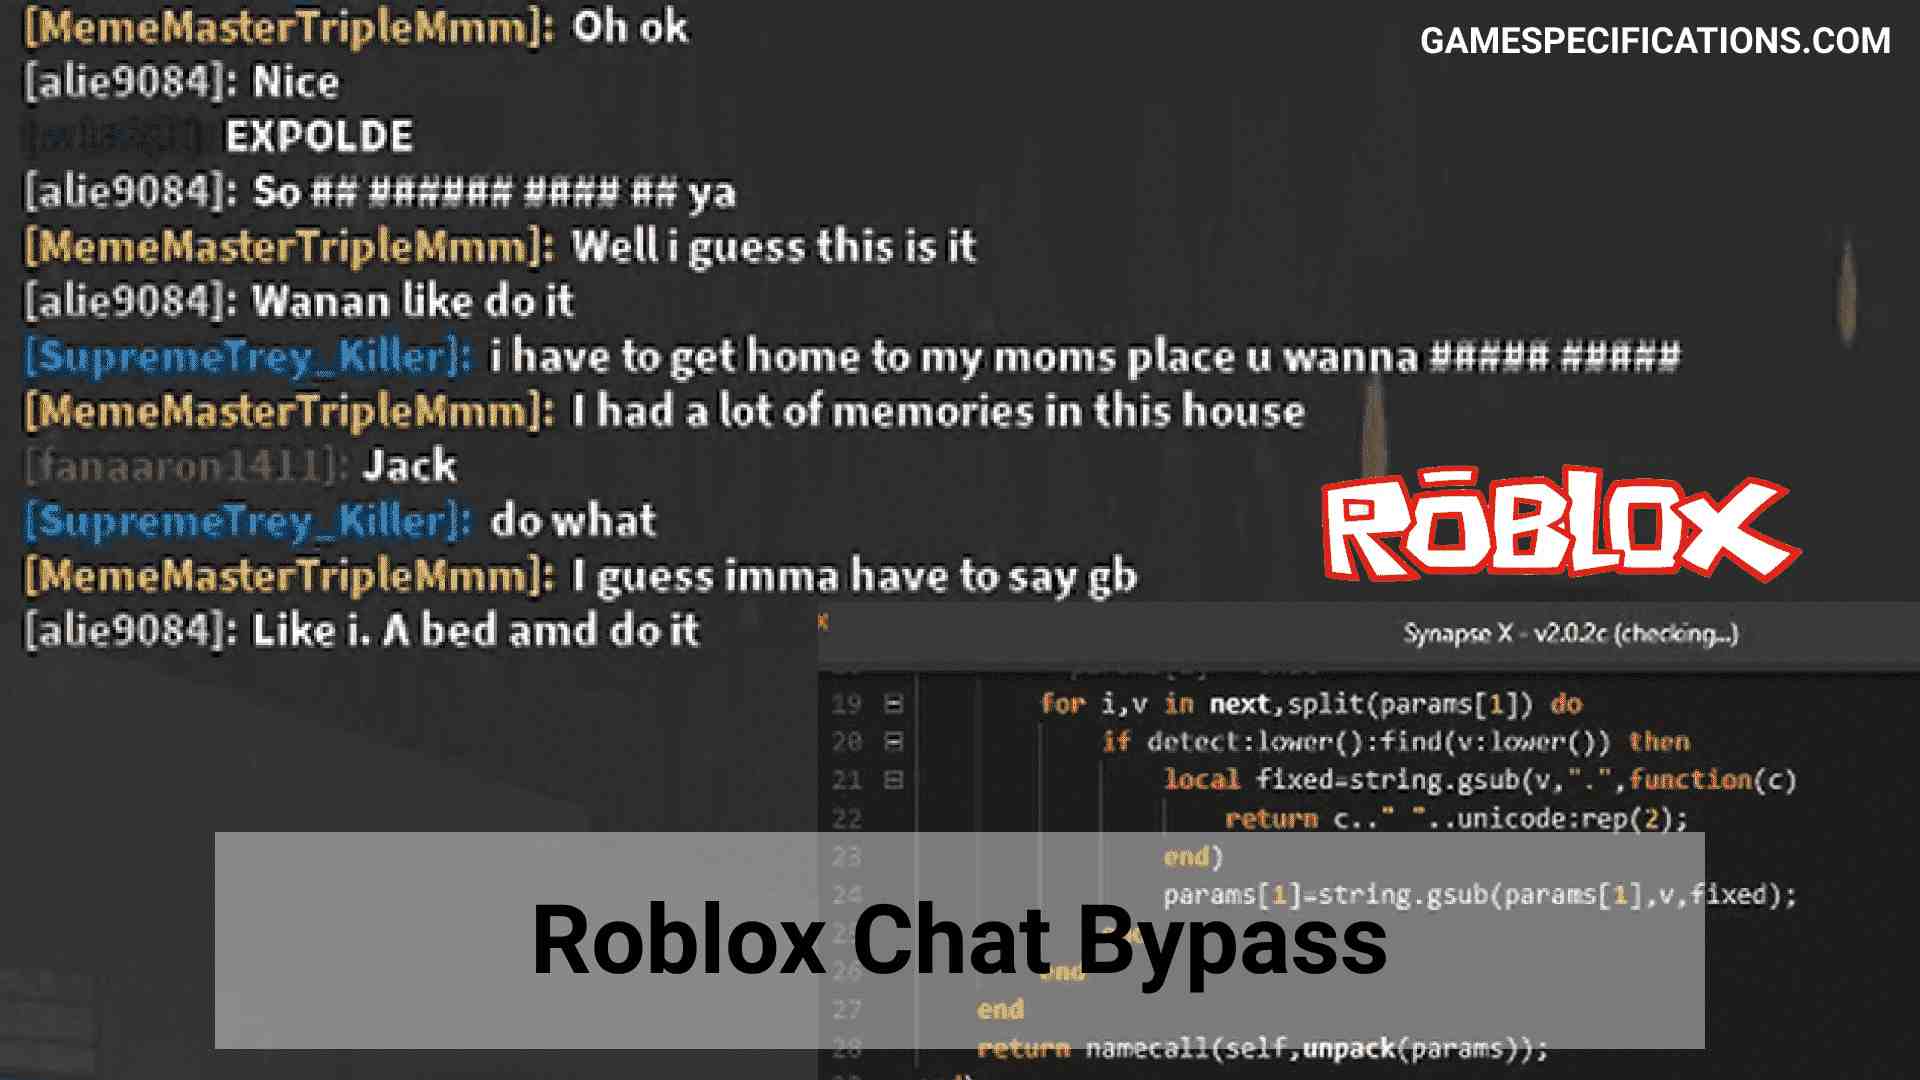 3 Ultimate Ways For Roblox Chat Bypass 2021 Game Specifications - roblox bypassed codes 2021 may